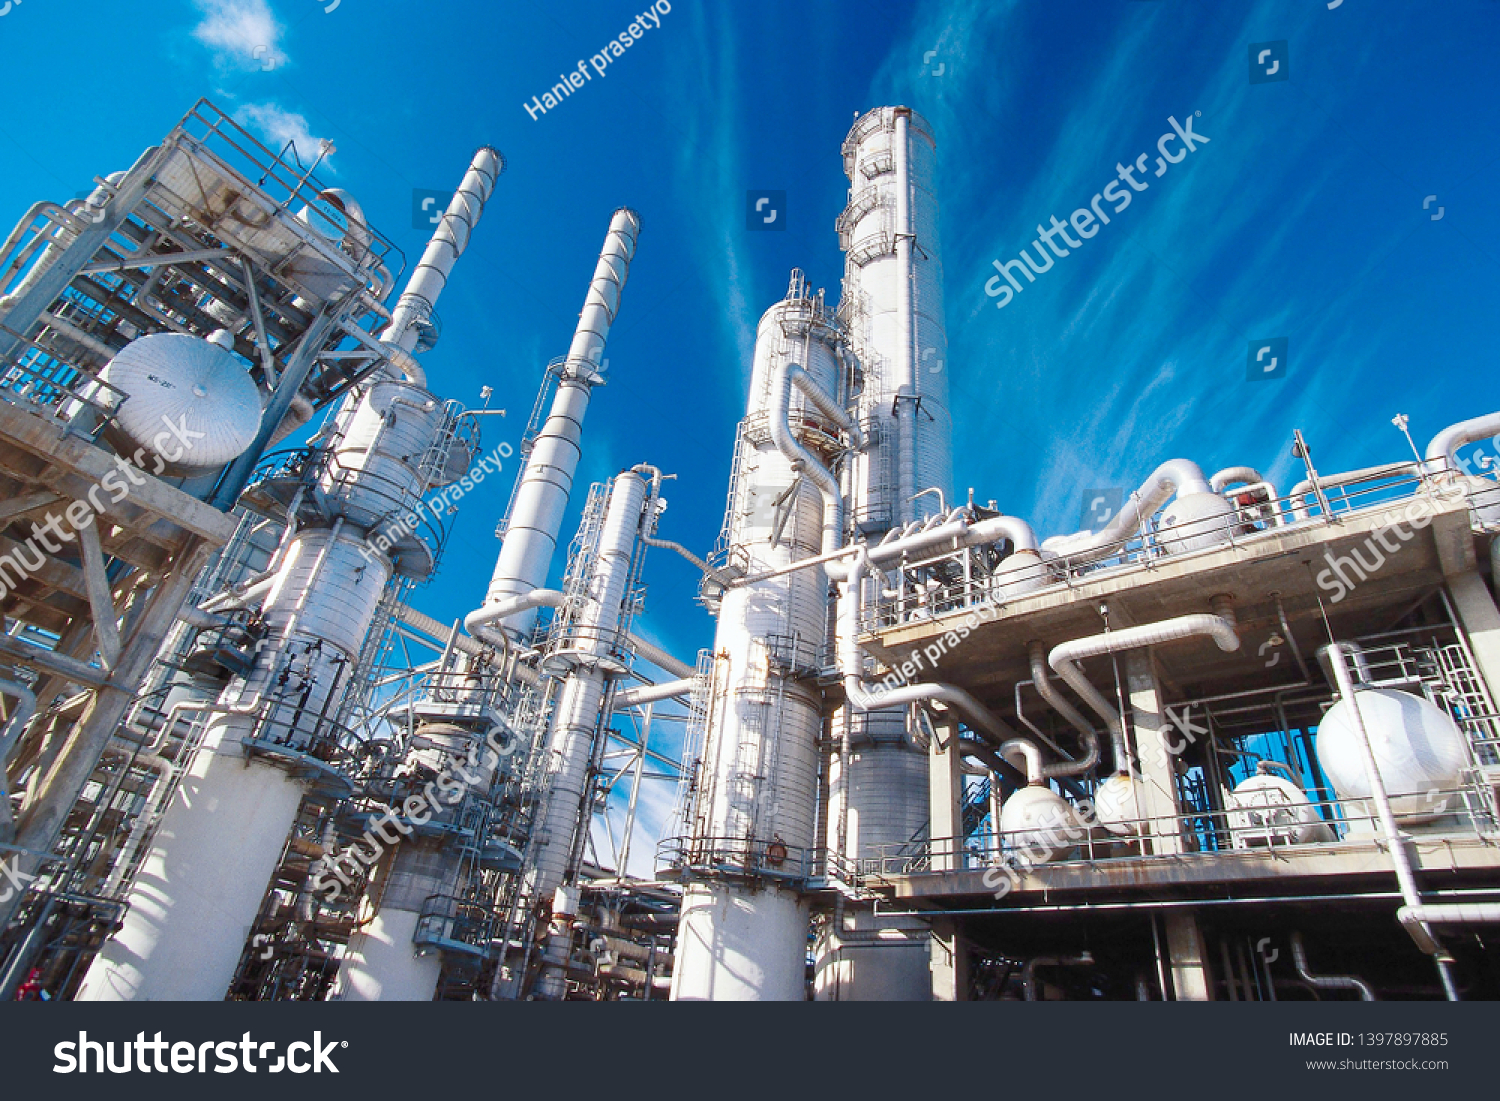 oil and gas industry equipment #1397897885